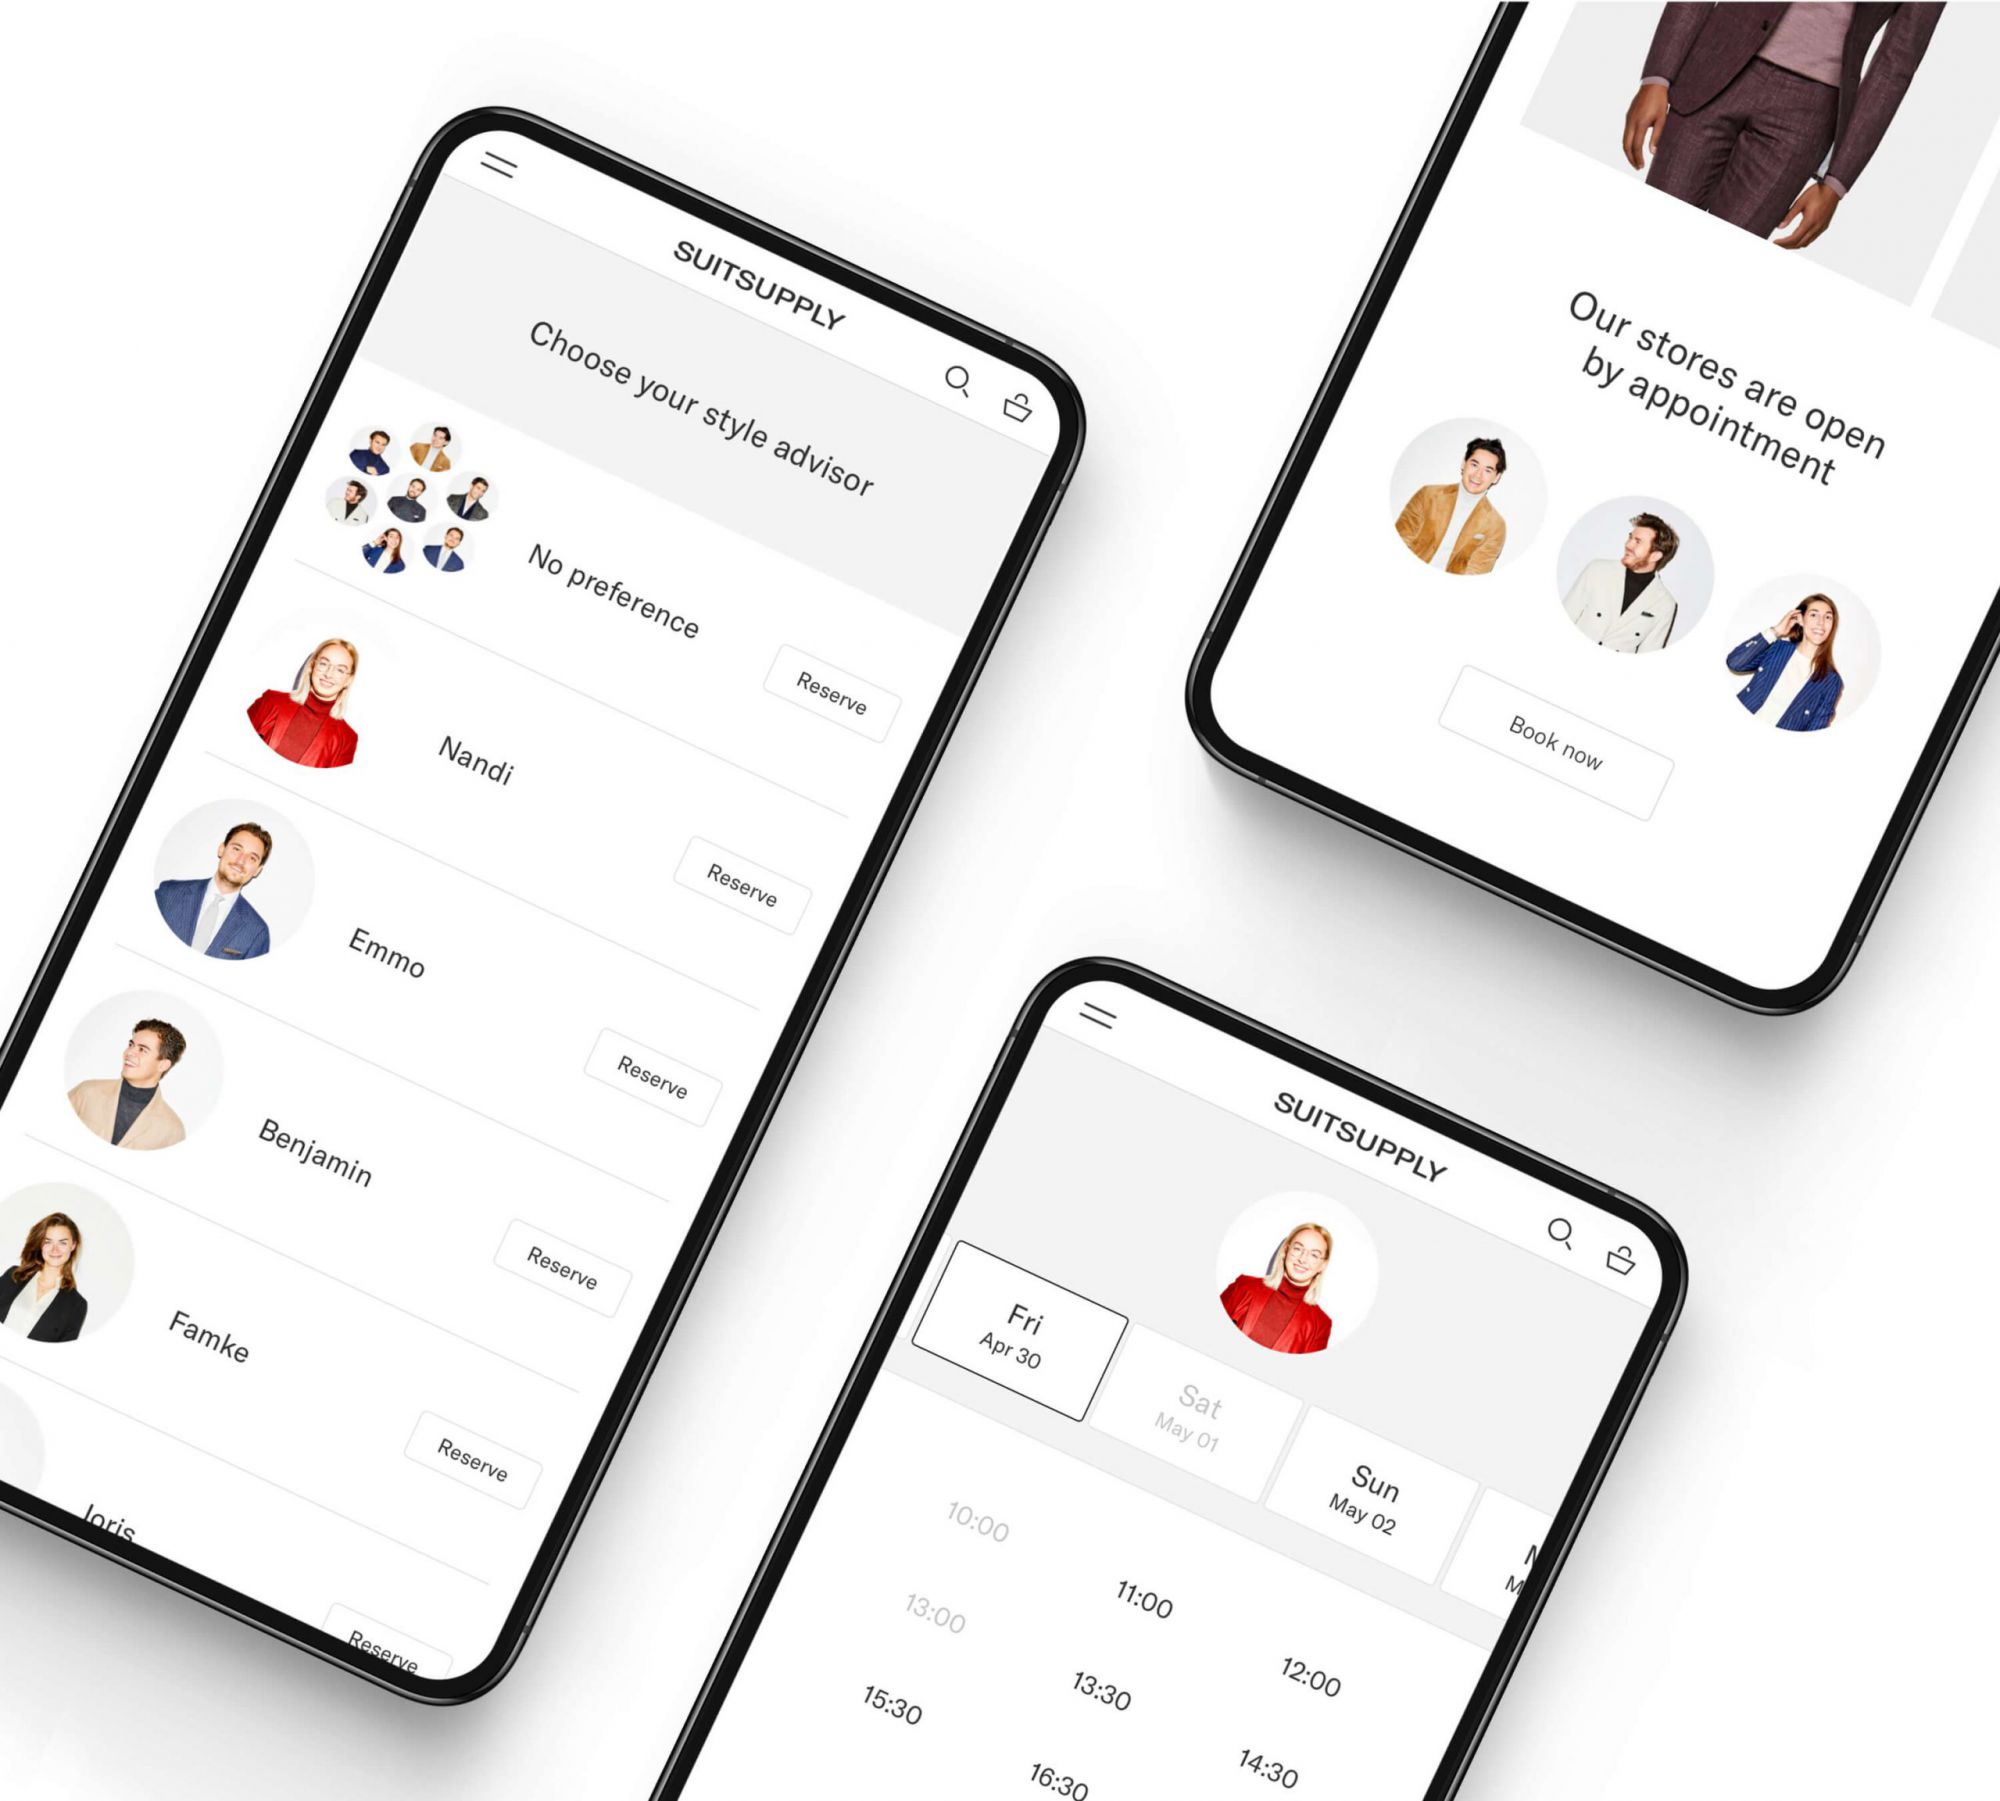 Style advice ecommerce tool for fashion brand, Suitsupply.